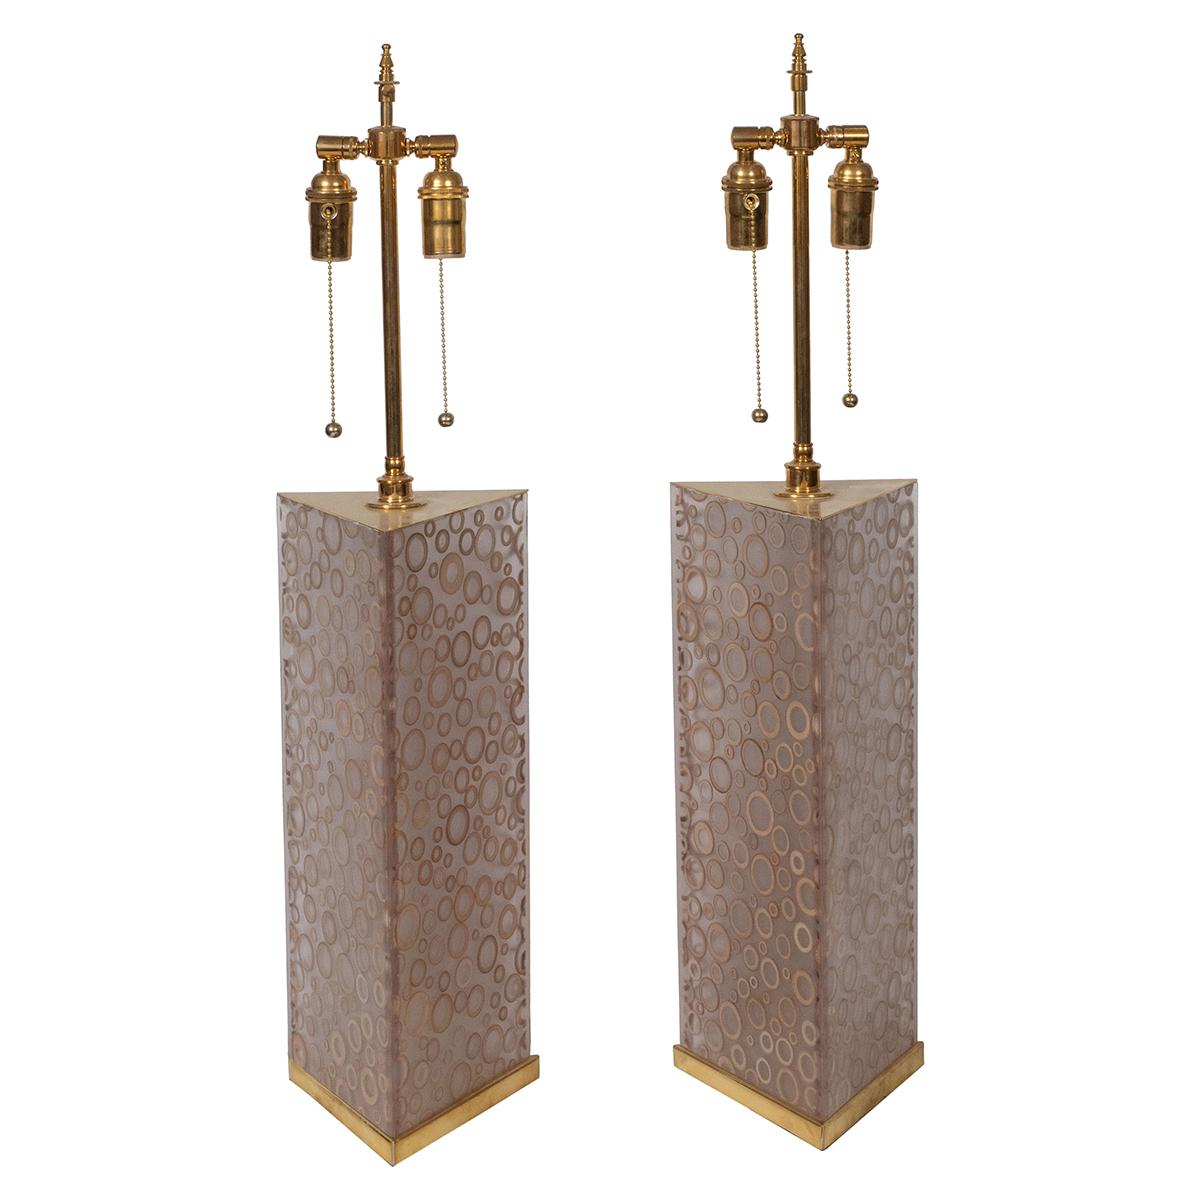 Pair of smoked acrylic lamps with ring motif and brass hardware.